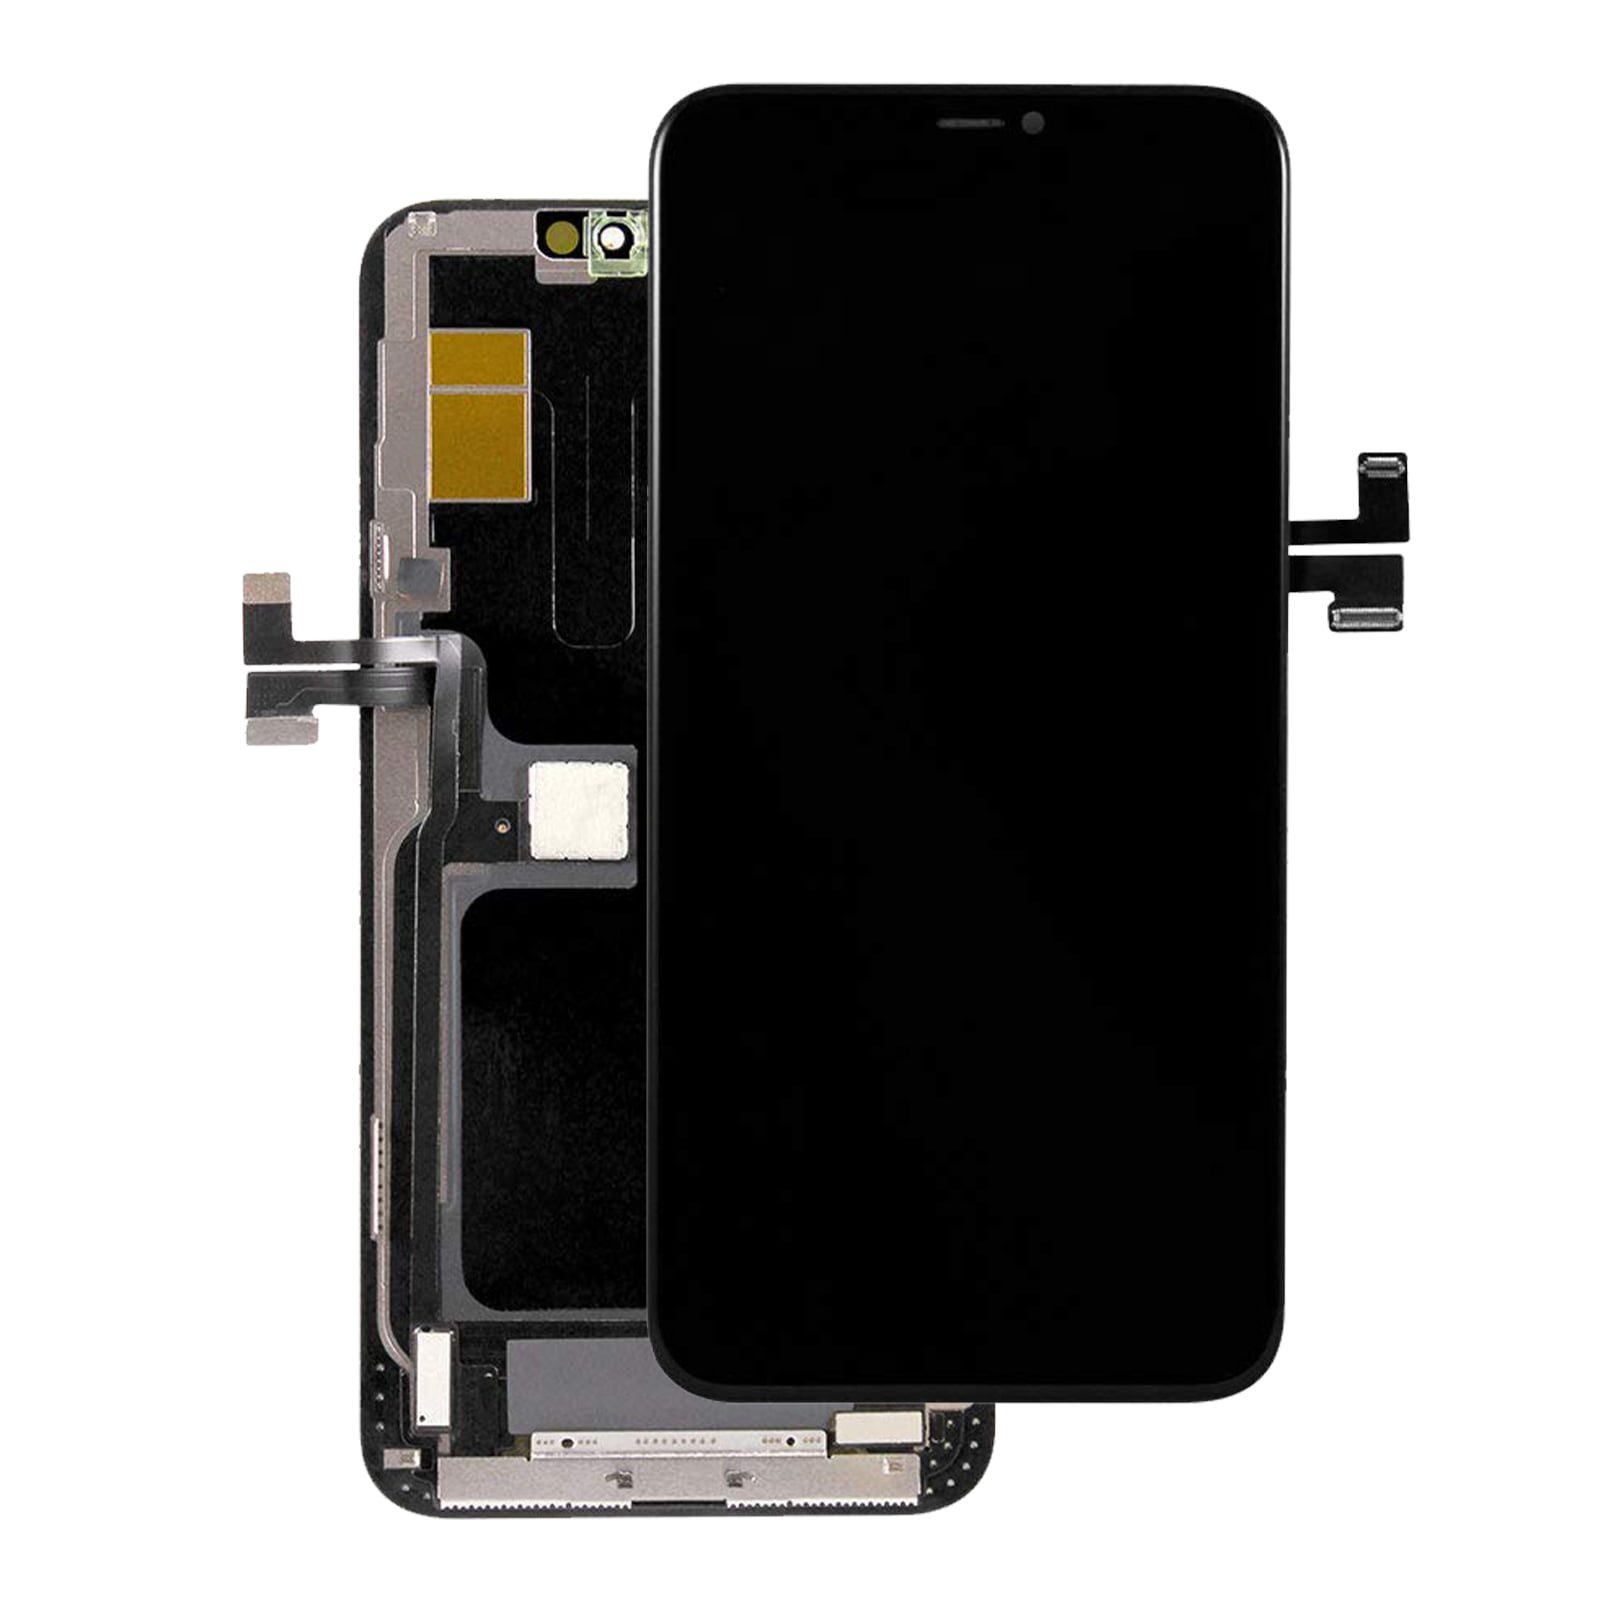 100% Original New Lcd For iPhone 11 Display Touch Screen With Metal Sheets  Replacement Factory Screen For iPhone 11 Pro Max Lcd